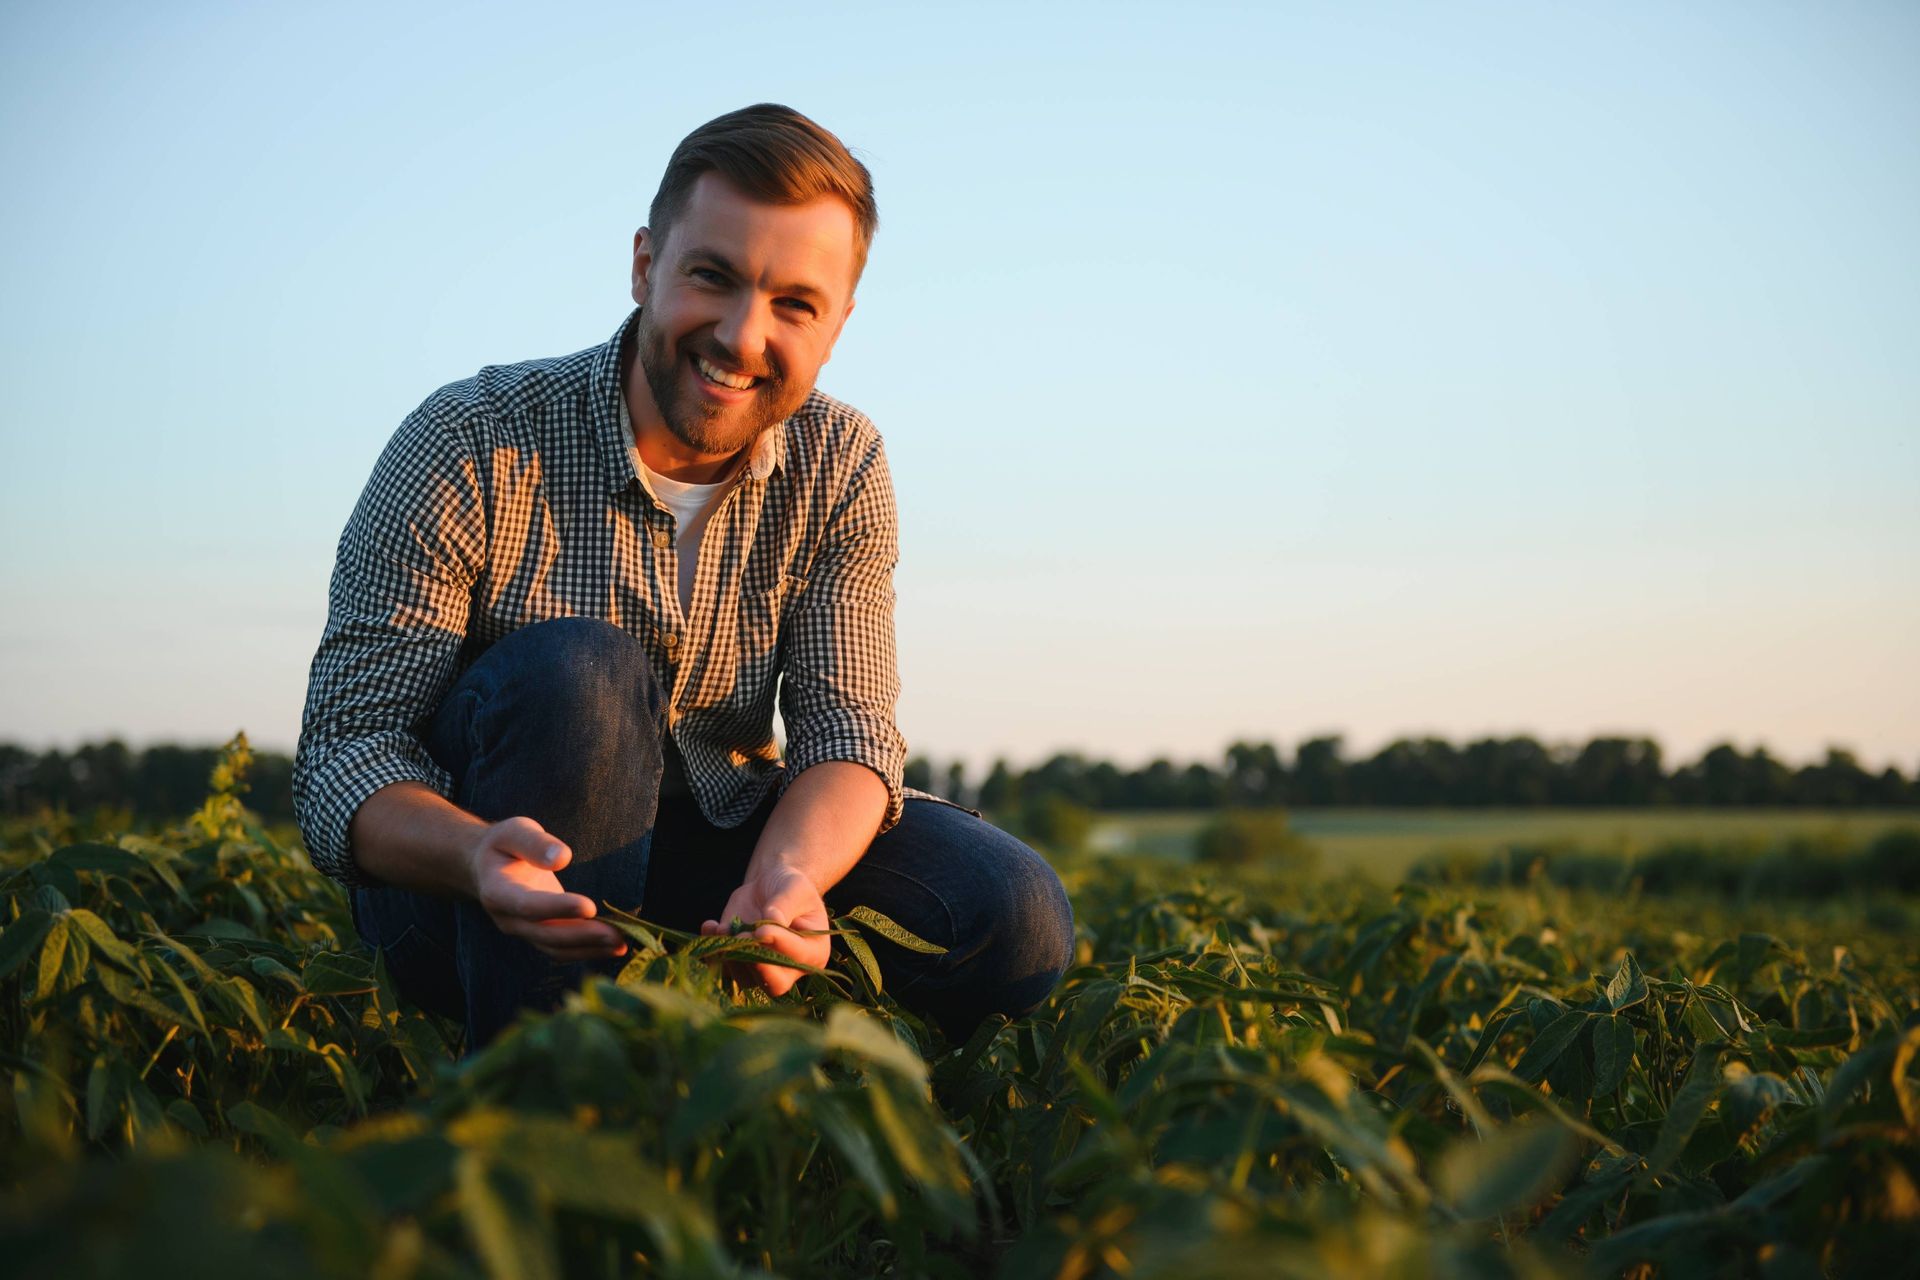 Image of a vegetable producer in a field at sunset checking plant growth